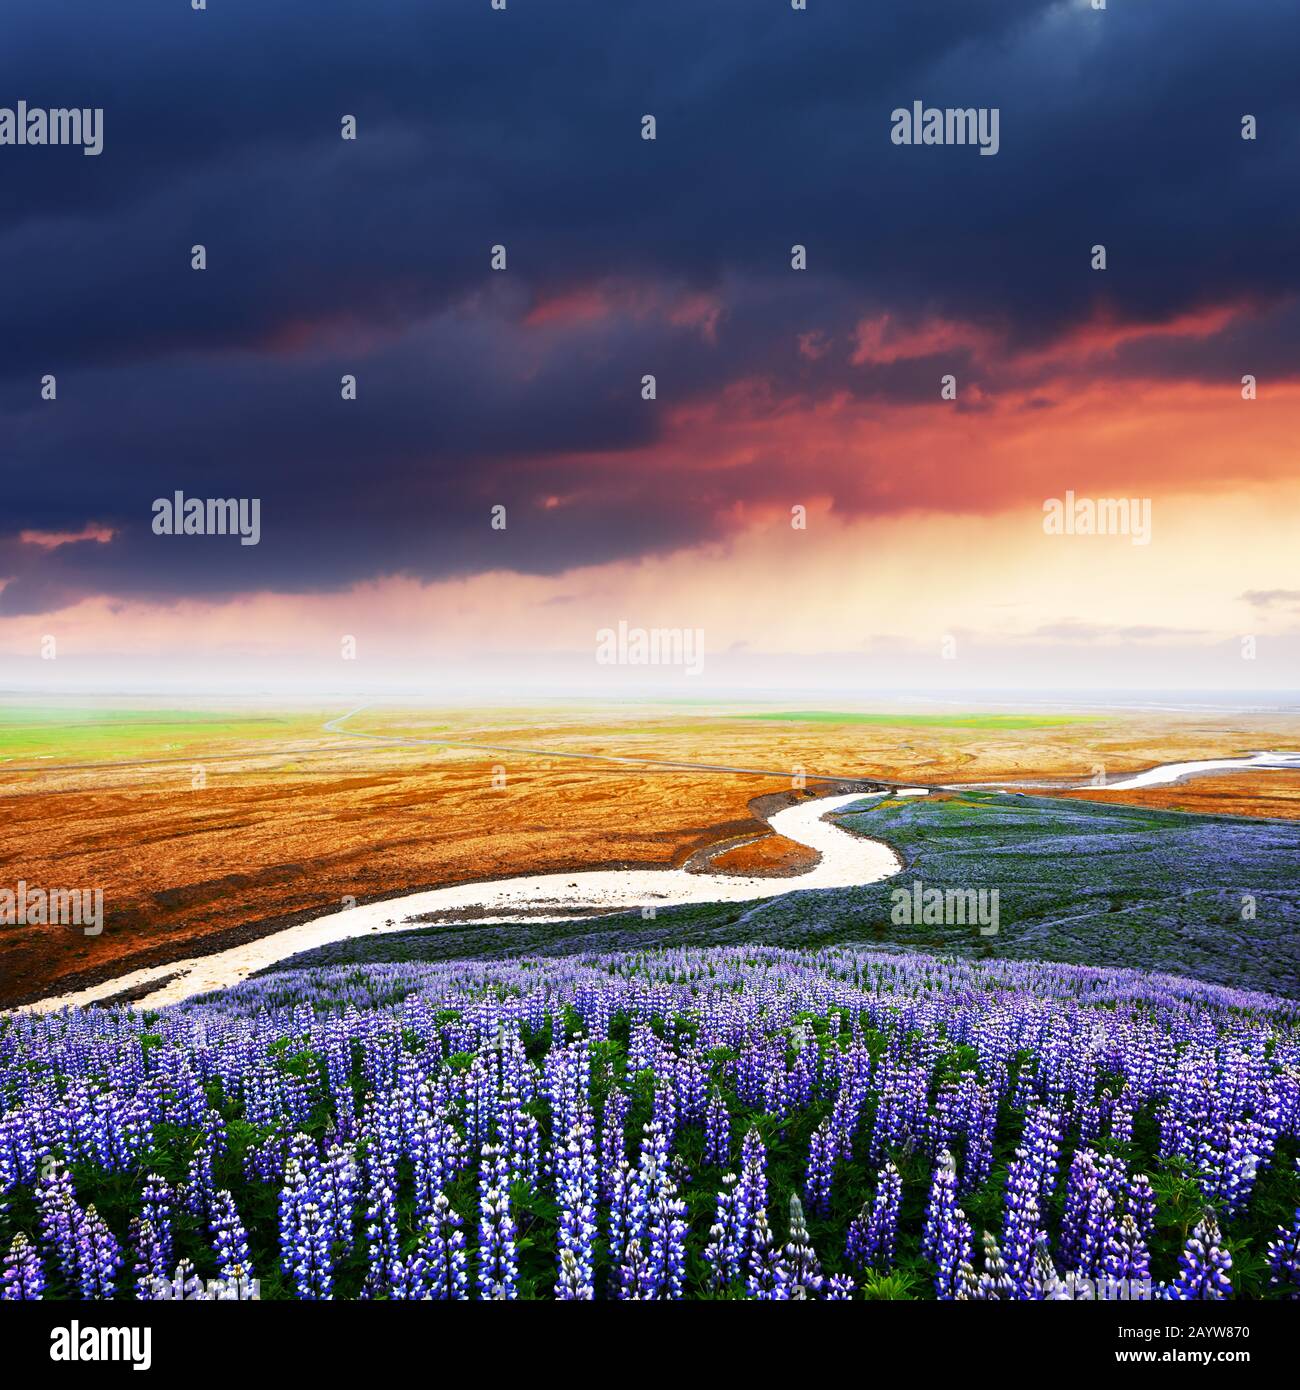 Gorgeous landscape with river, lupine flowers field and colourful sunset sky. Iceland, Europe Stock Photo